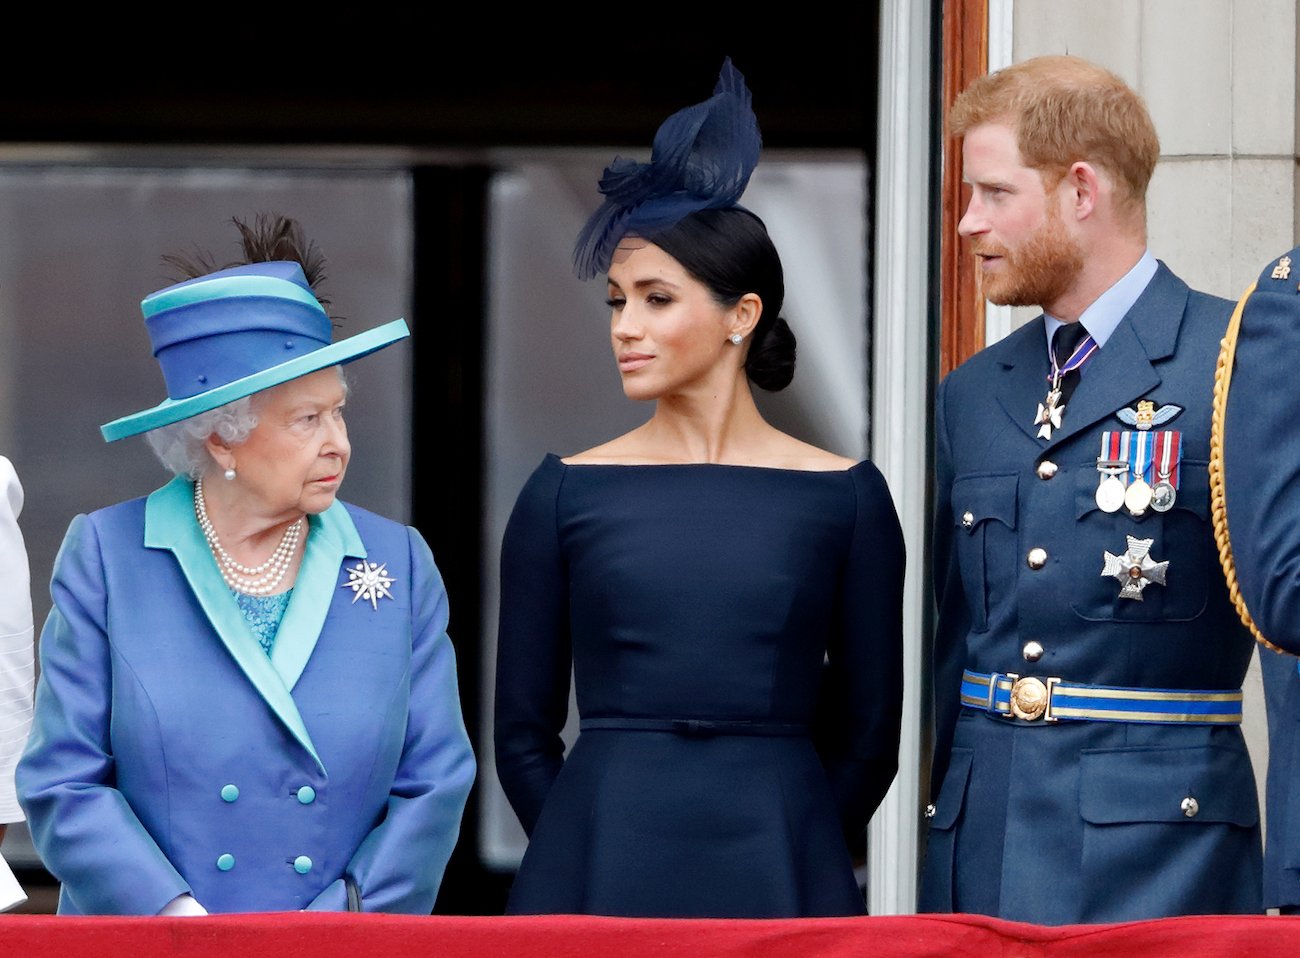 Queen Elizabeth, Meghan Markle, and Prince Harry standing on a balcony and looking in different directions